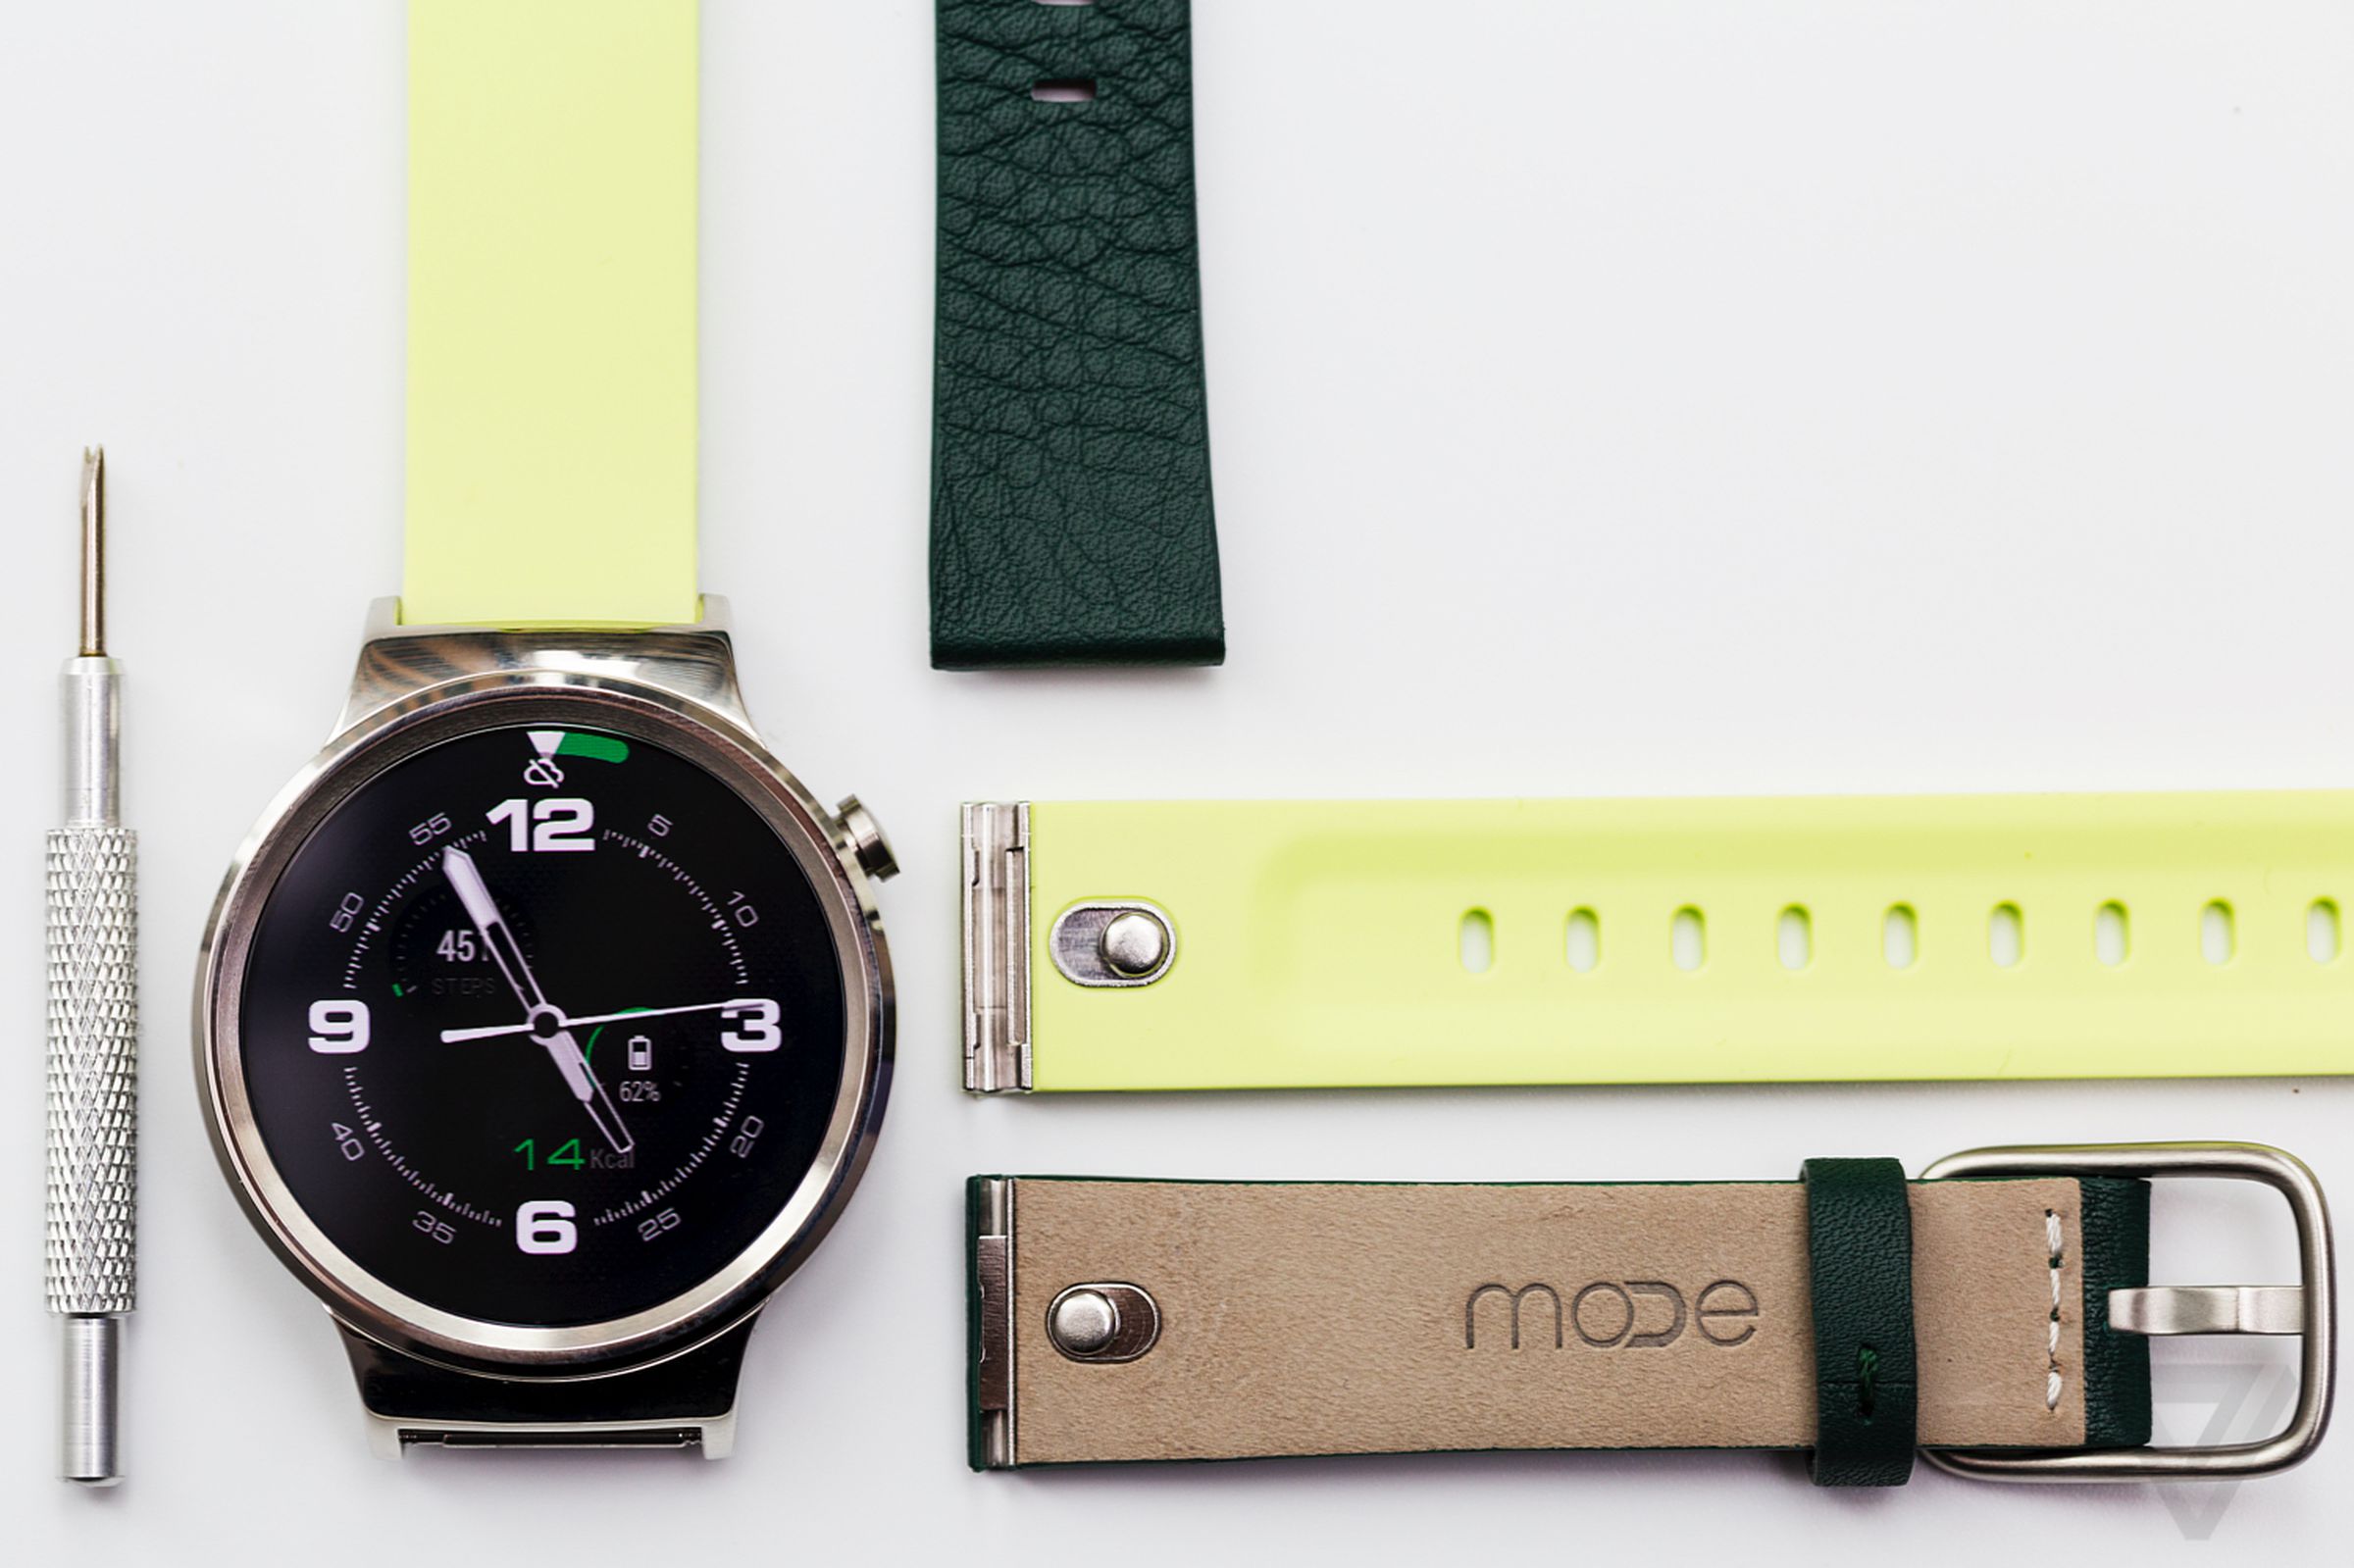 Android Wear Mode watchband hands on photos